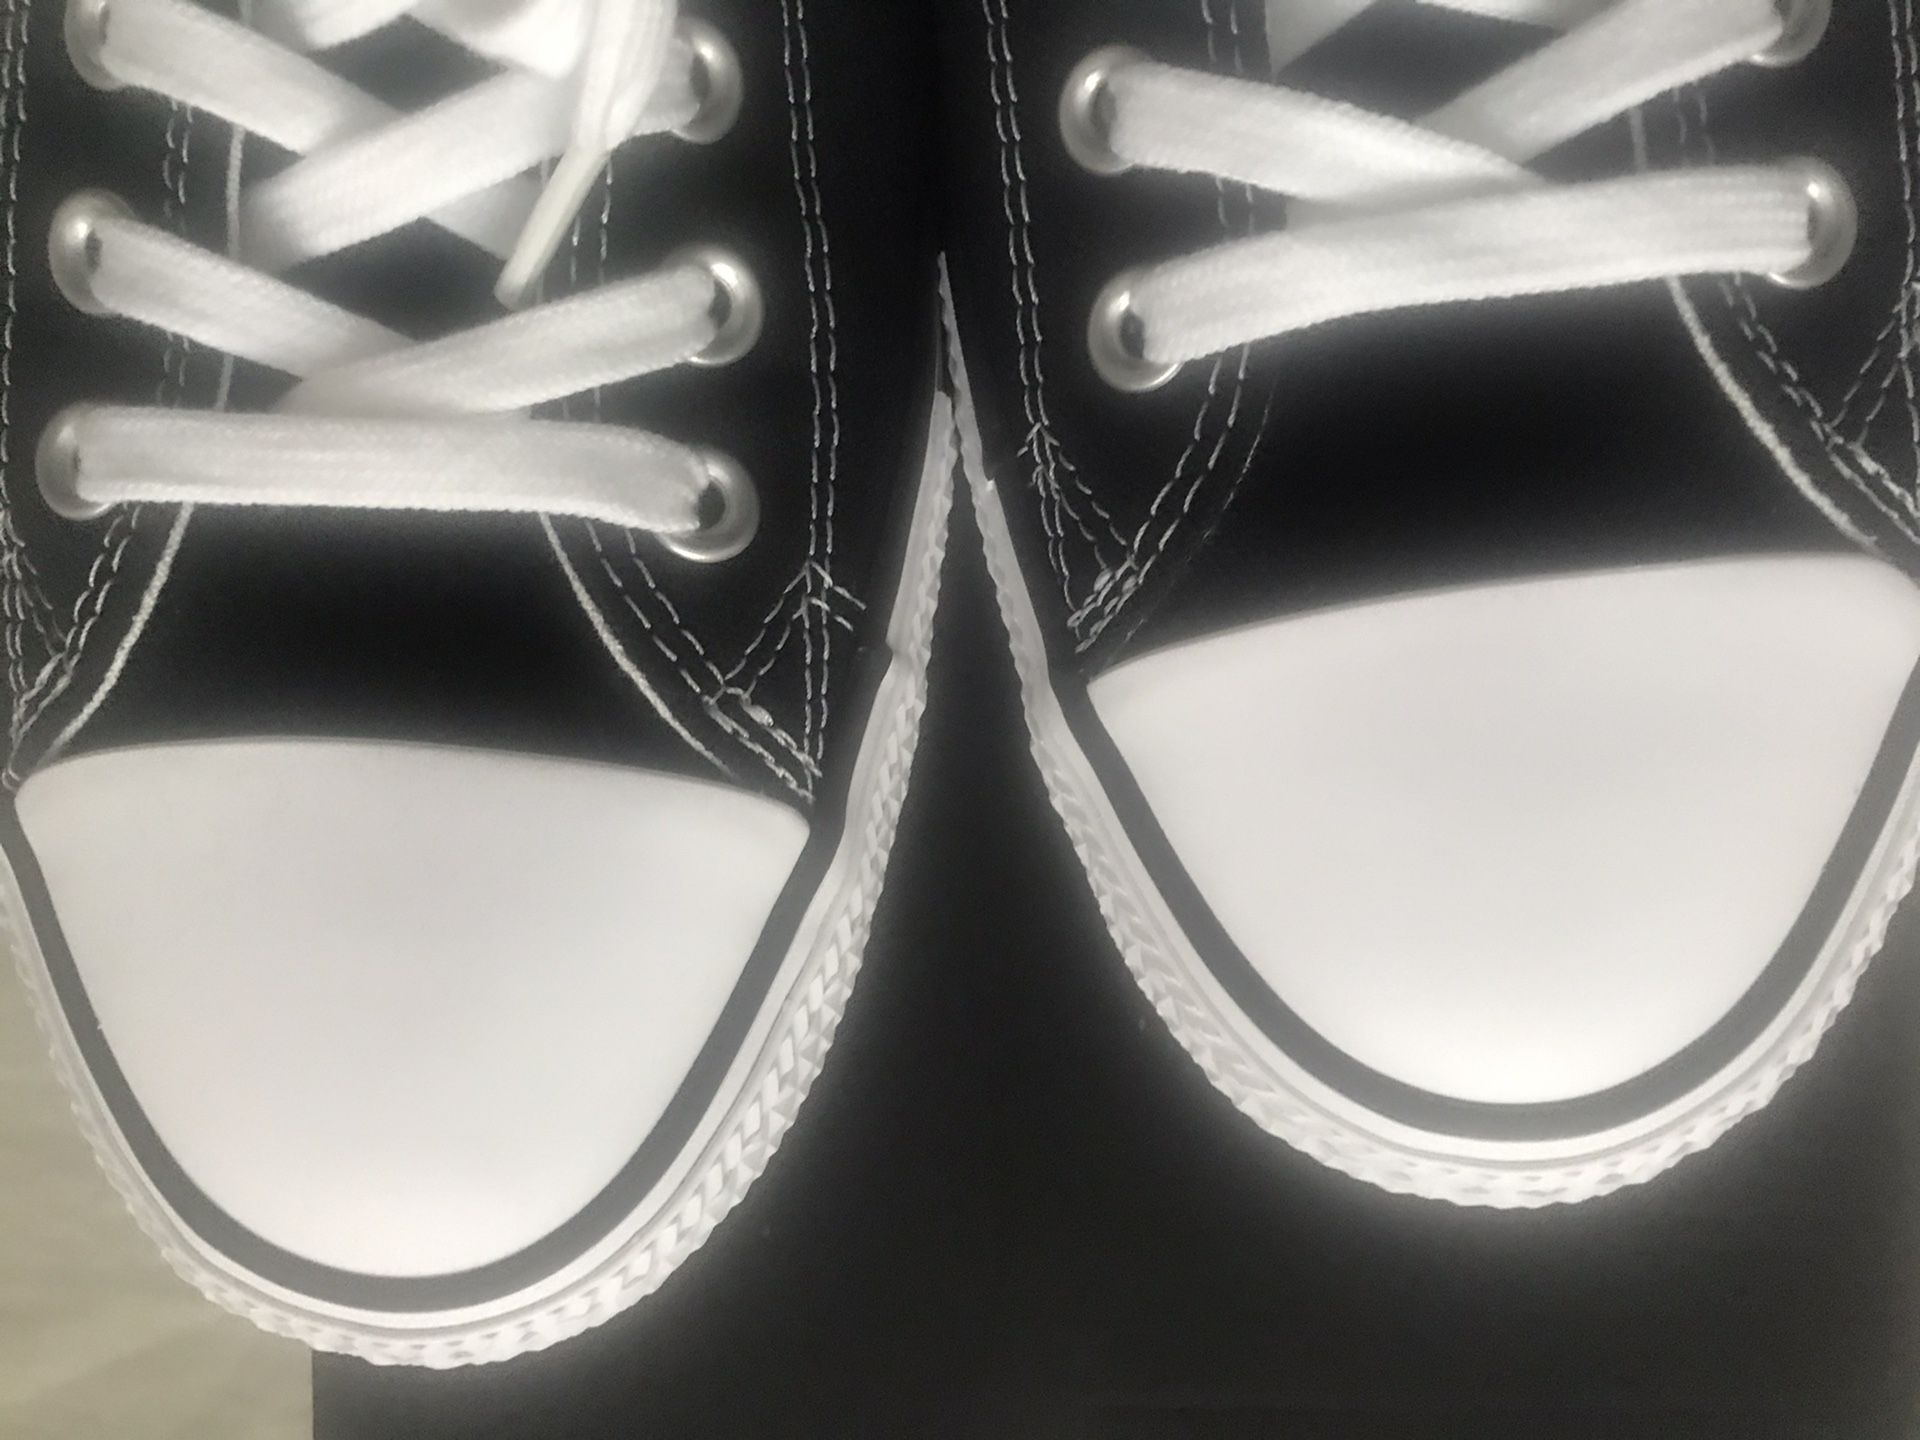 New-never used Black and white converse